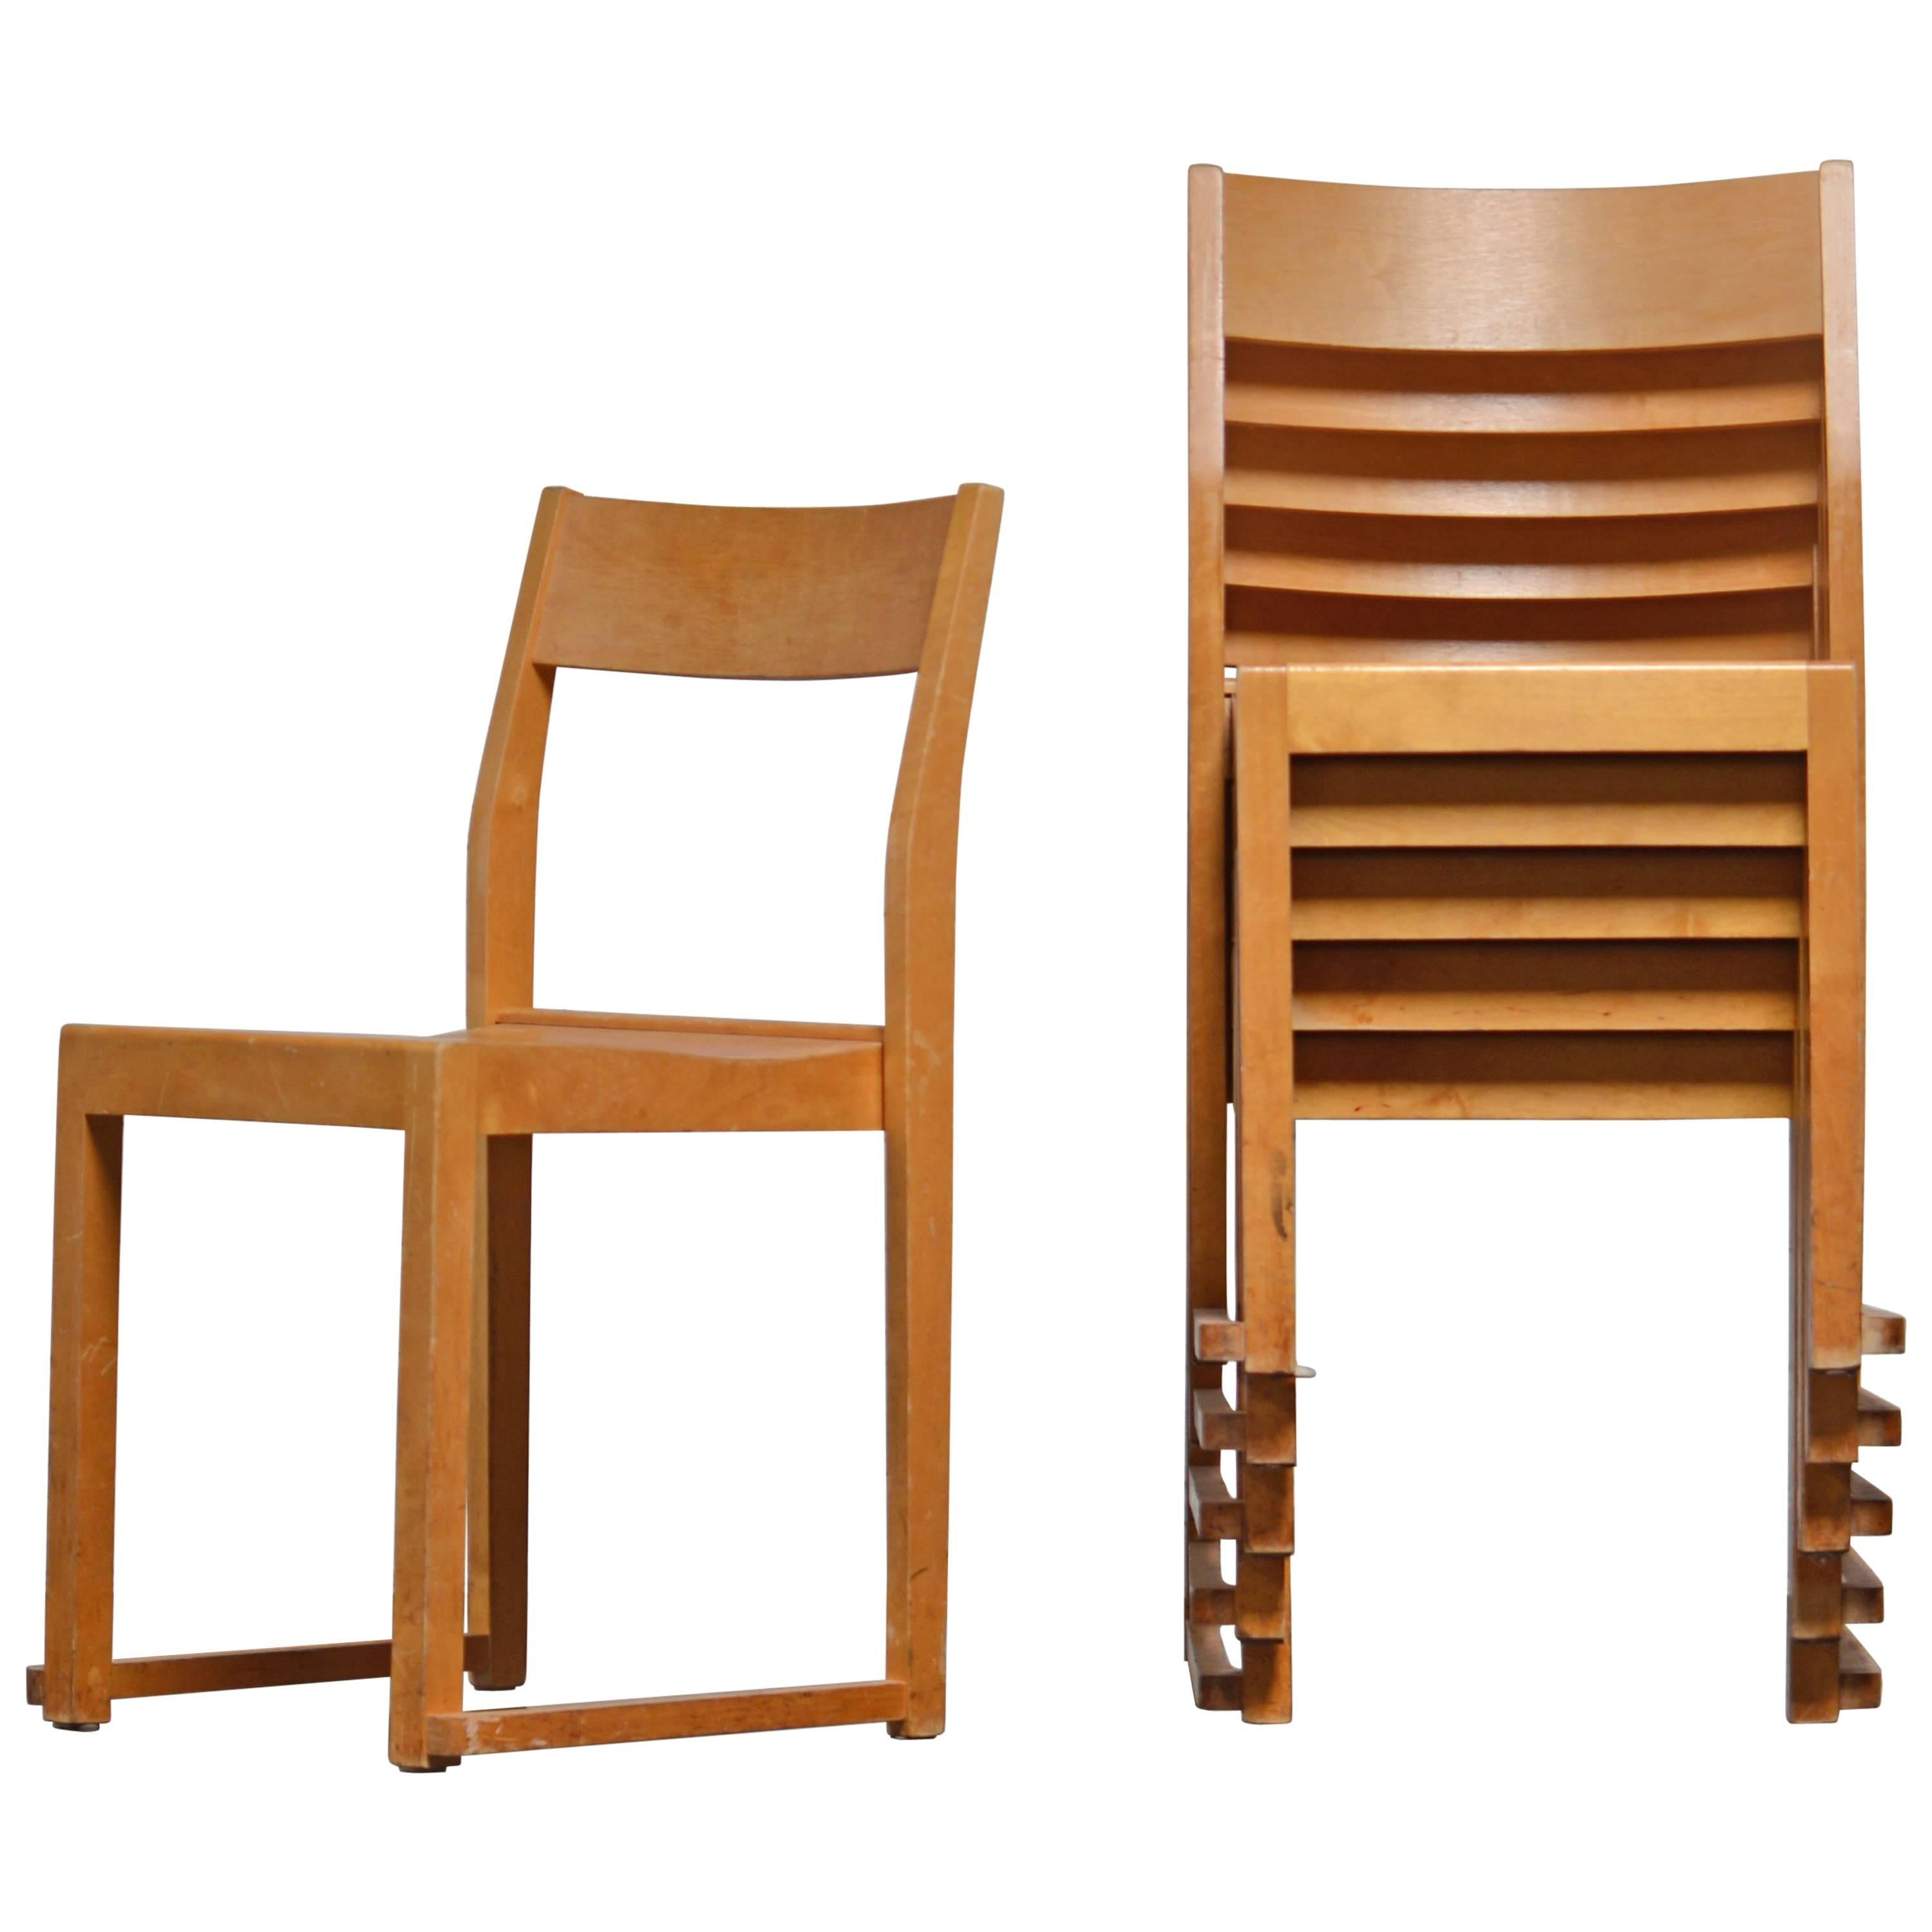 Sven Markelius Six Stacking Chairs, Bodafors, Sweden, 1931 For Sale